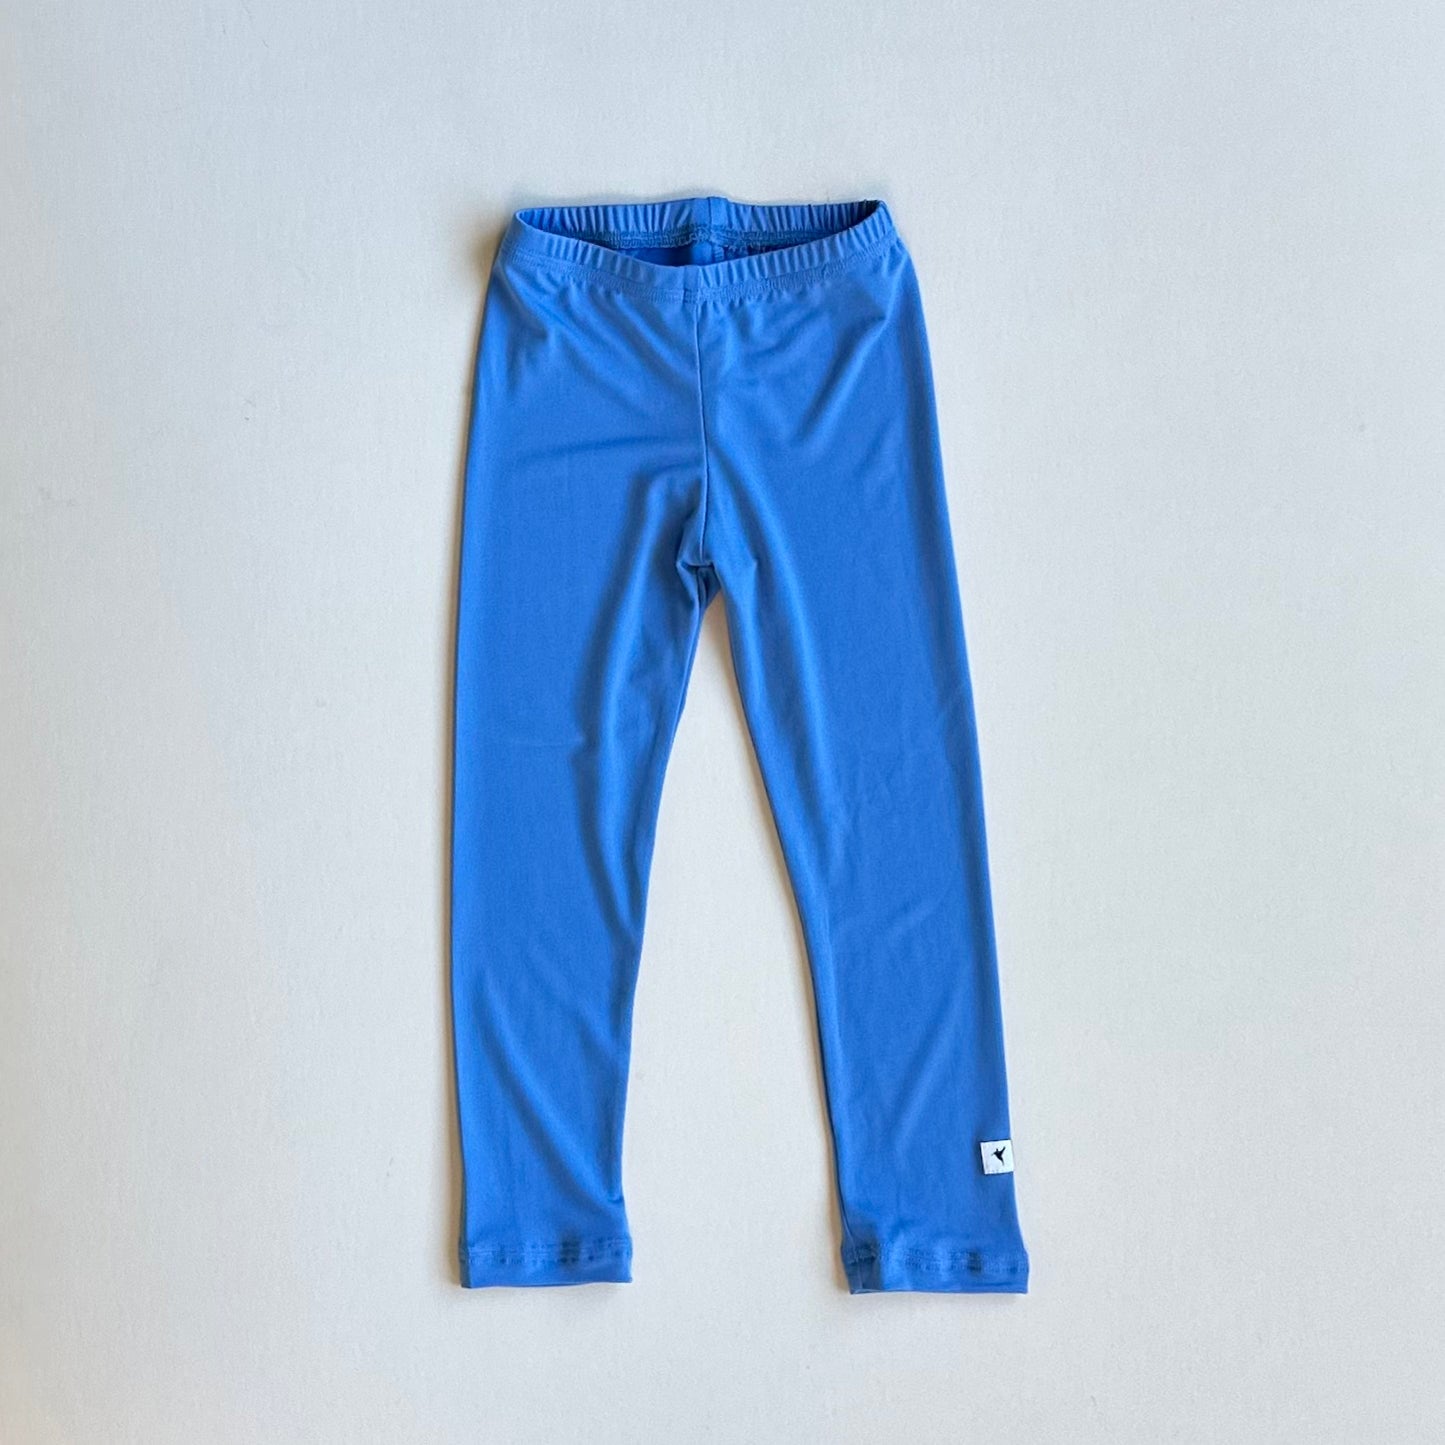 Leggings Handmade in Victoria, BC, Canada for Kids in Eco-Friendly Fabric, Blue